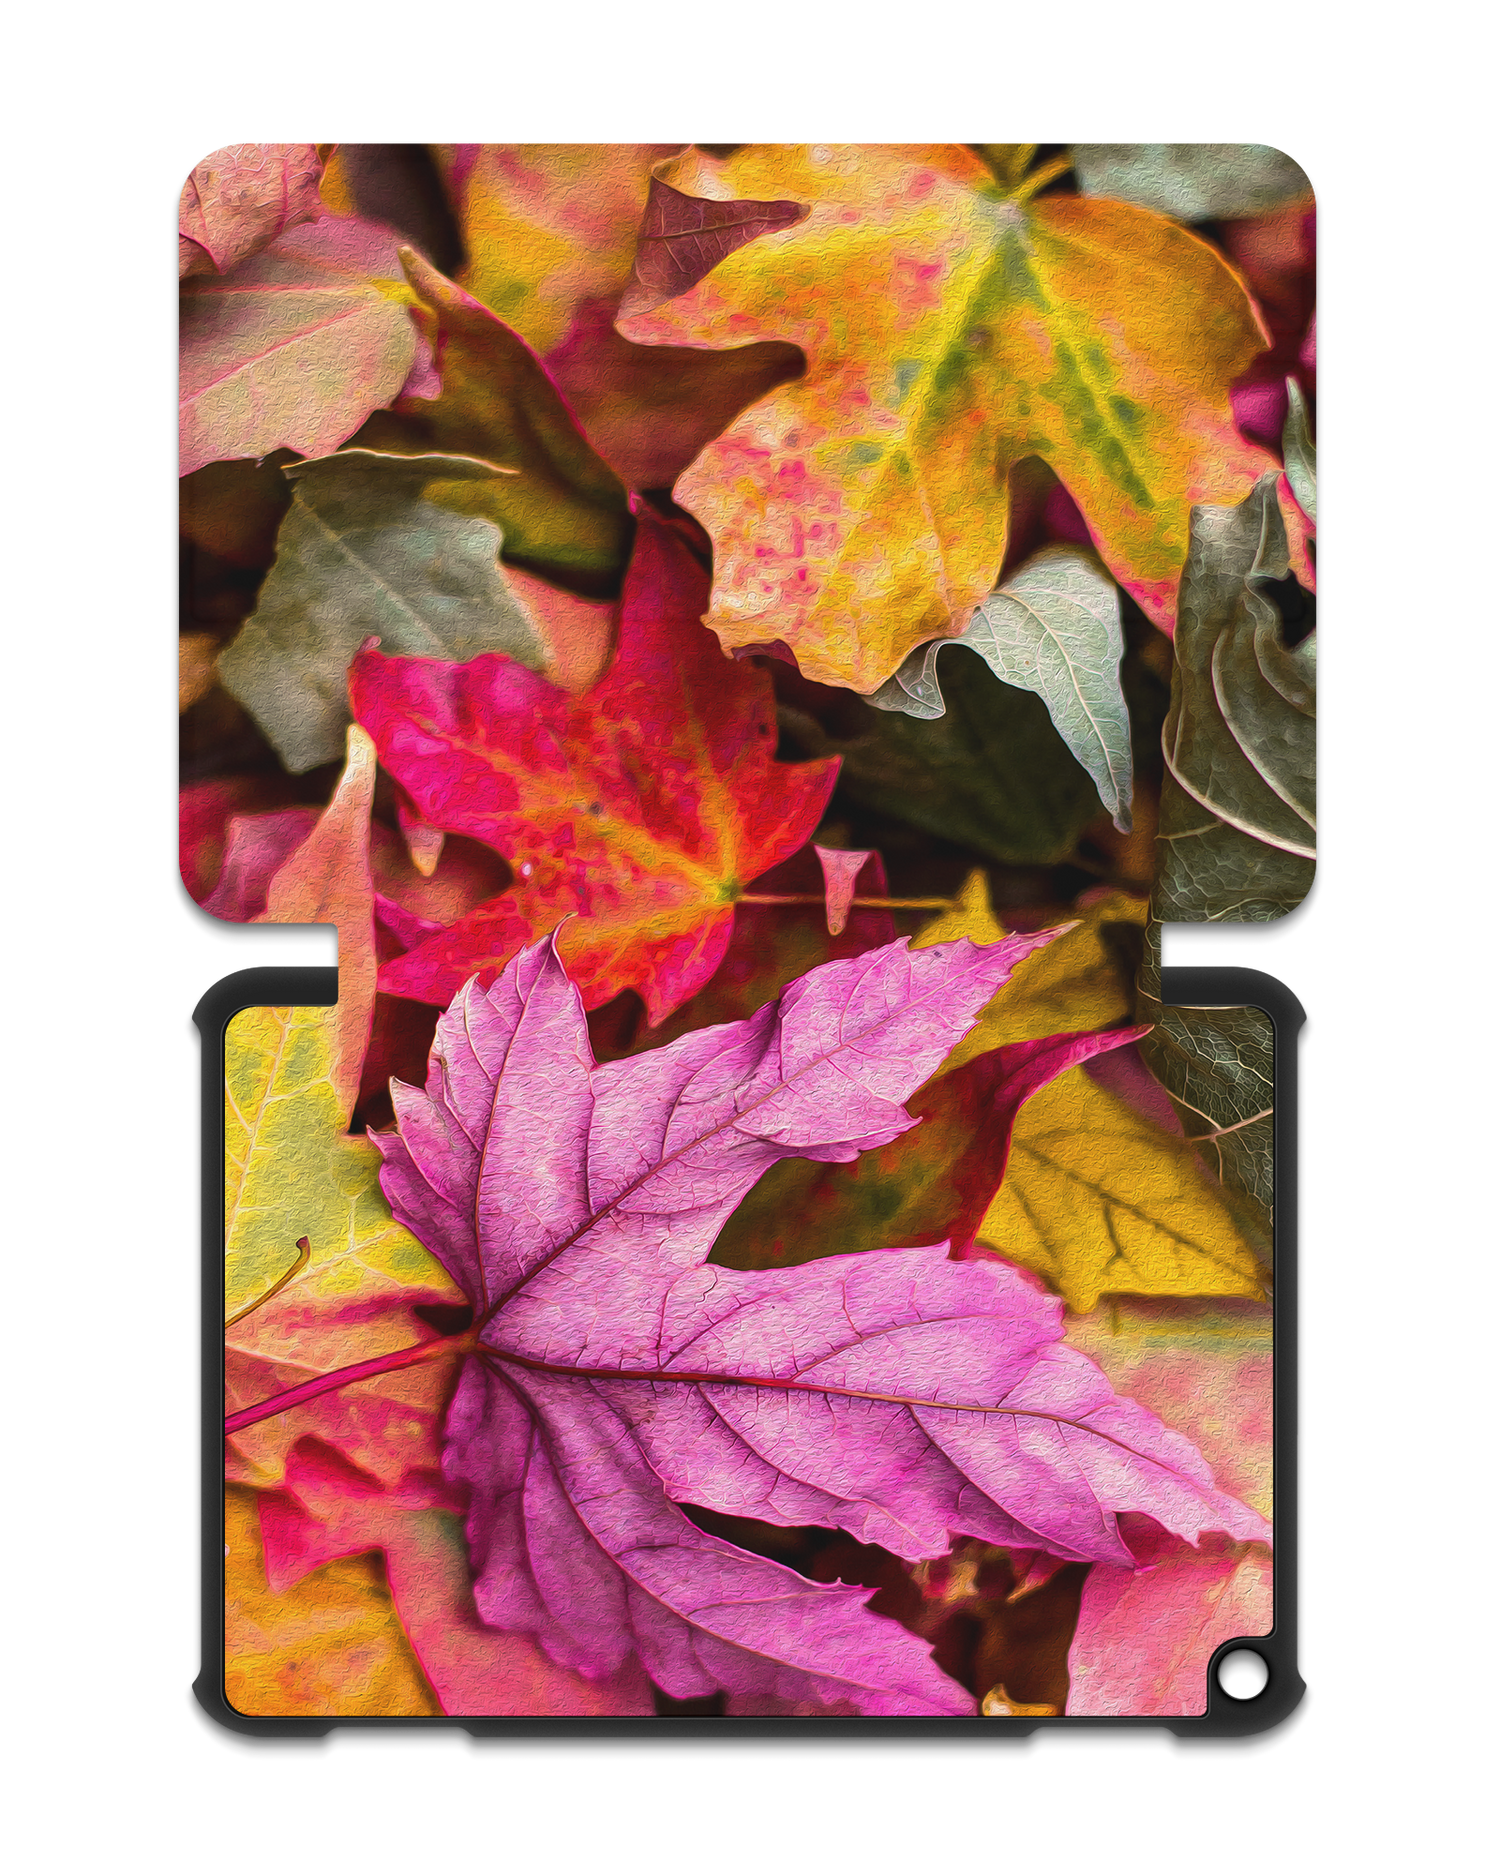 Autumn Leaves Tablet Smart Case for Amazon Fire HD 8 (2022), Amazon Fire HD 8 Plus (2022), Amazon Fire HD 8 (2020), Amazon Fire HD 8 Plus (2020): Opened